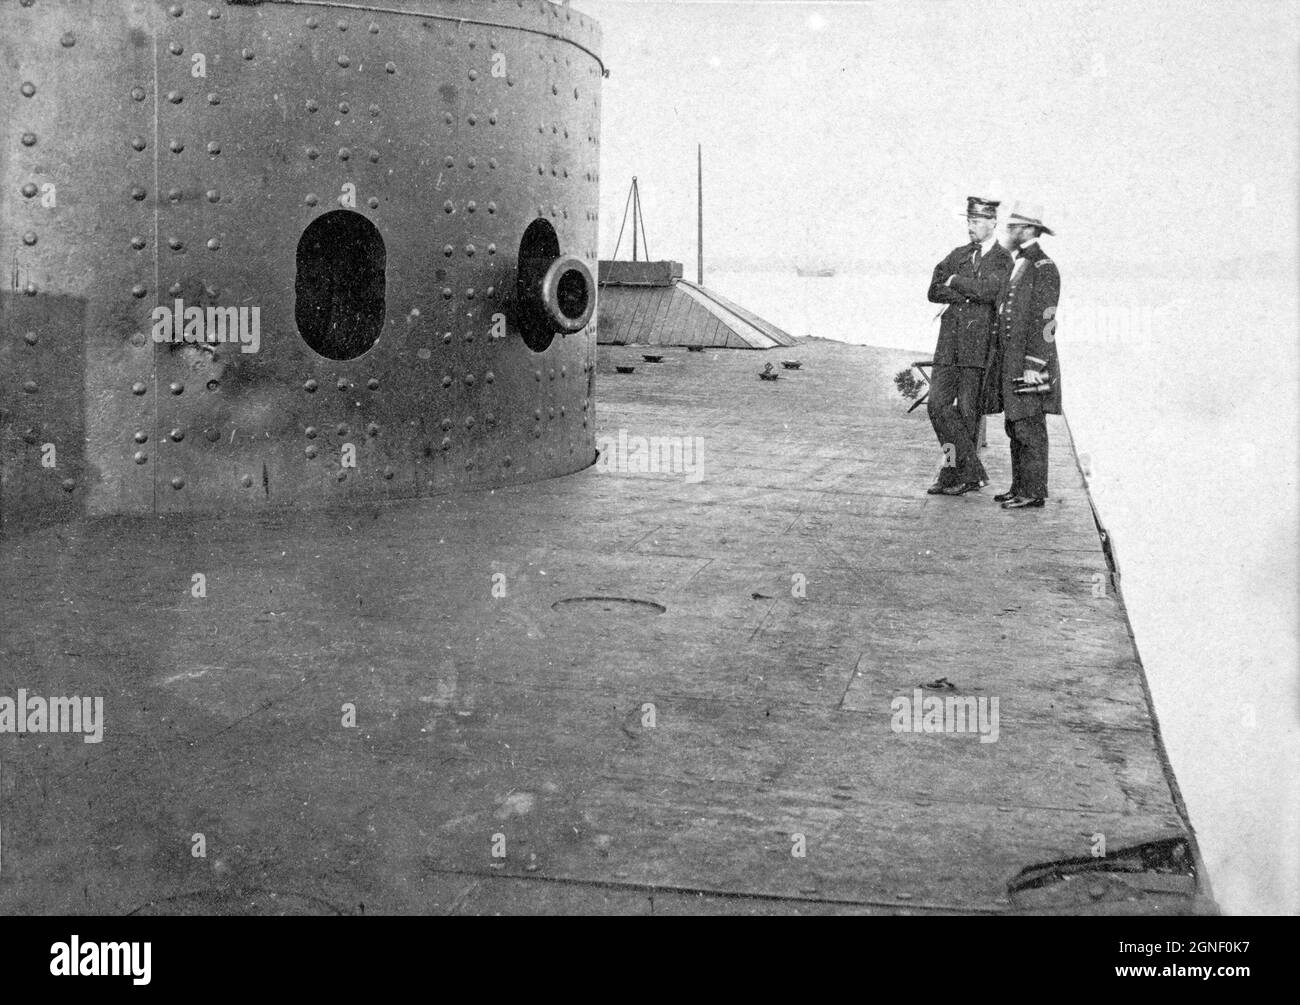 Vintage photograph circa 1862 Union navy iron clad USS Monitor on the James River, Virginia during the American Civil War showing the deck and gun turret and the muzzle of one of the Dahlgren guns she was equipped with Stock Photo